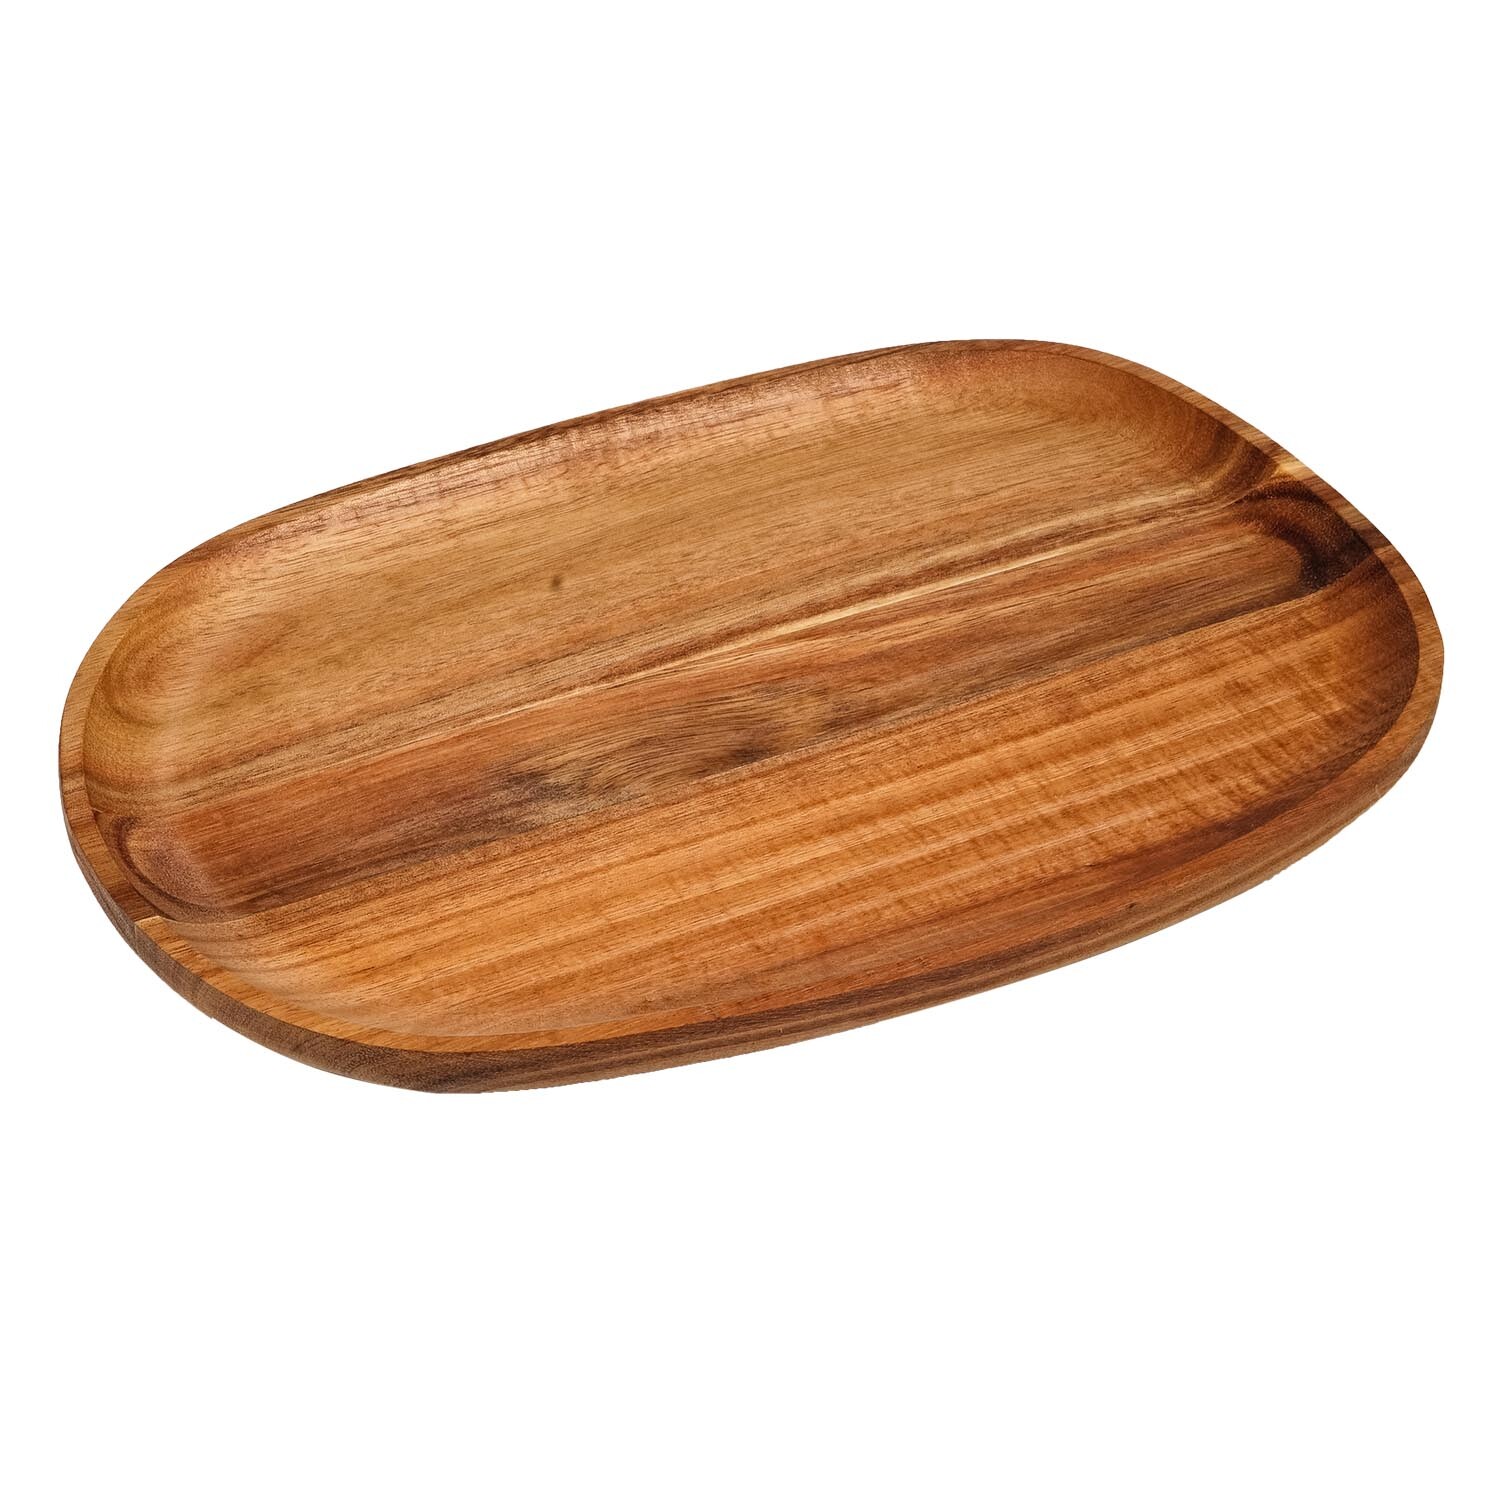 Acacia Wood Oval Serving Platter Image 2